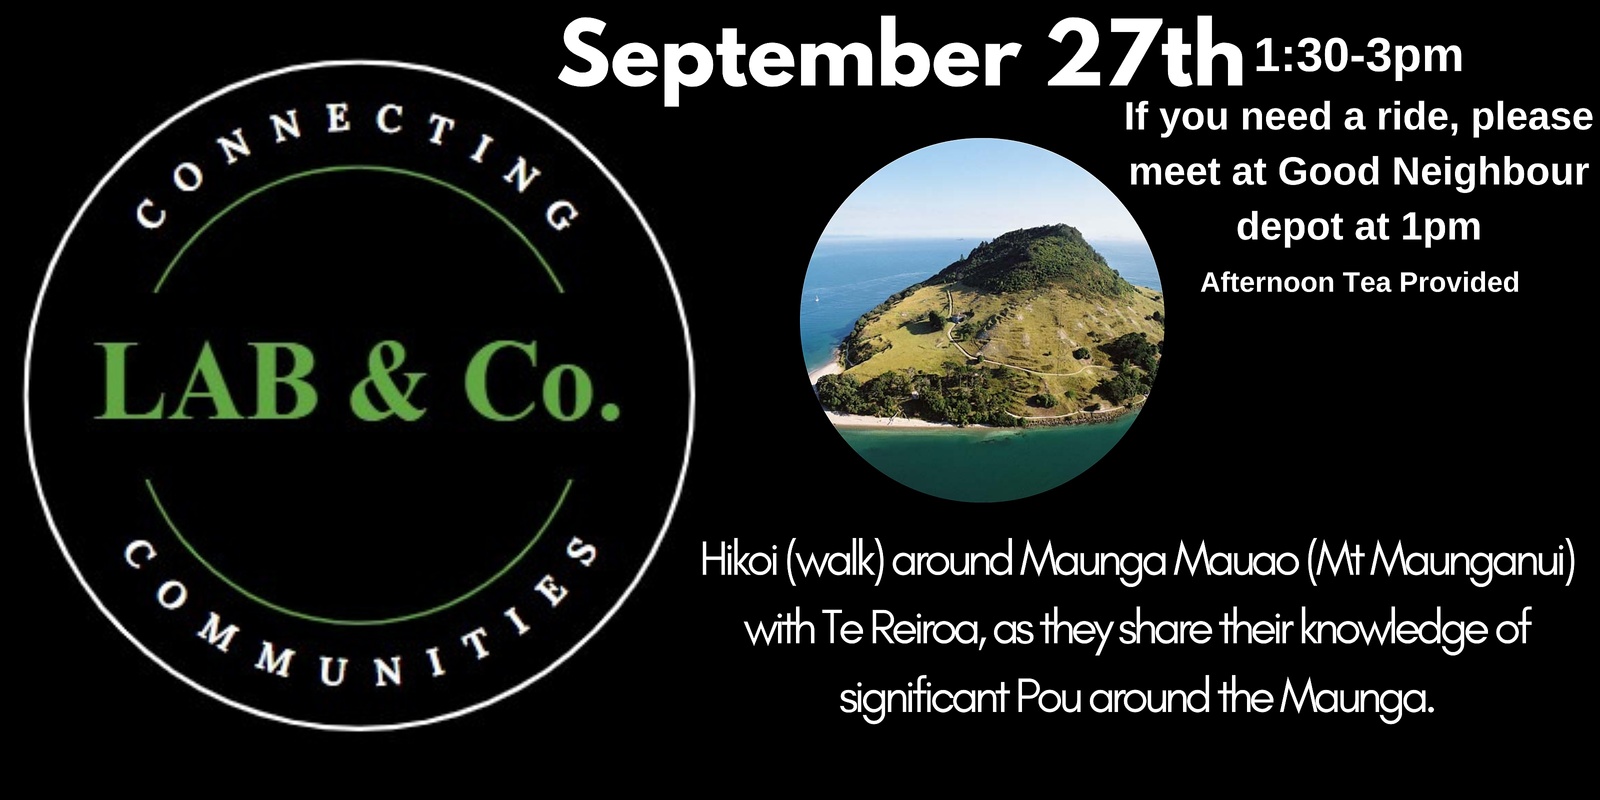 Banner image for LAB & Co. Proudly Brought to you By Good Neighbour - Hikoi (walk) around Maunga Mauao (Mt Maunganui) with Te Reiroa, as they share their knowledge of significant Pou around the Maunga.  Meet at Good Neighbour at 1pm if you need a ride.